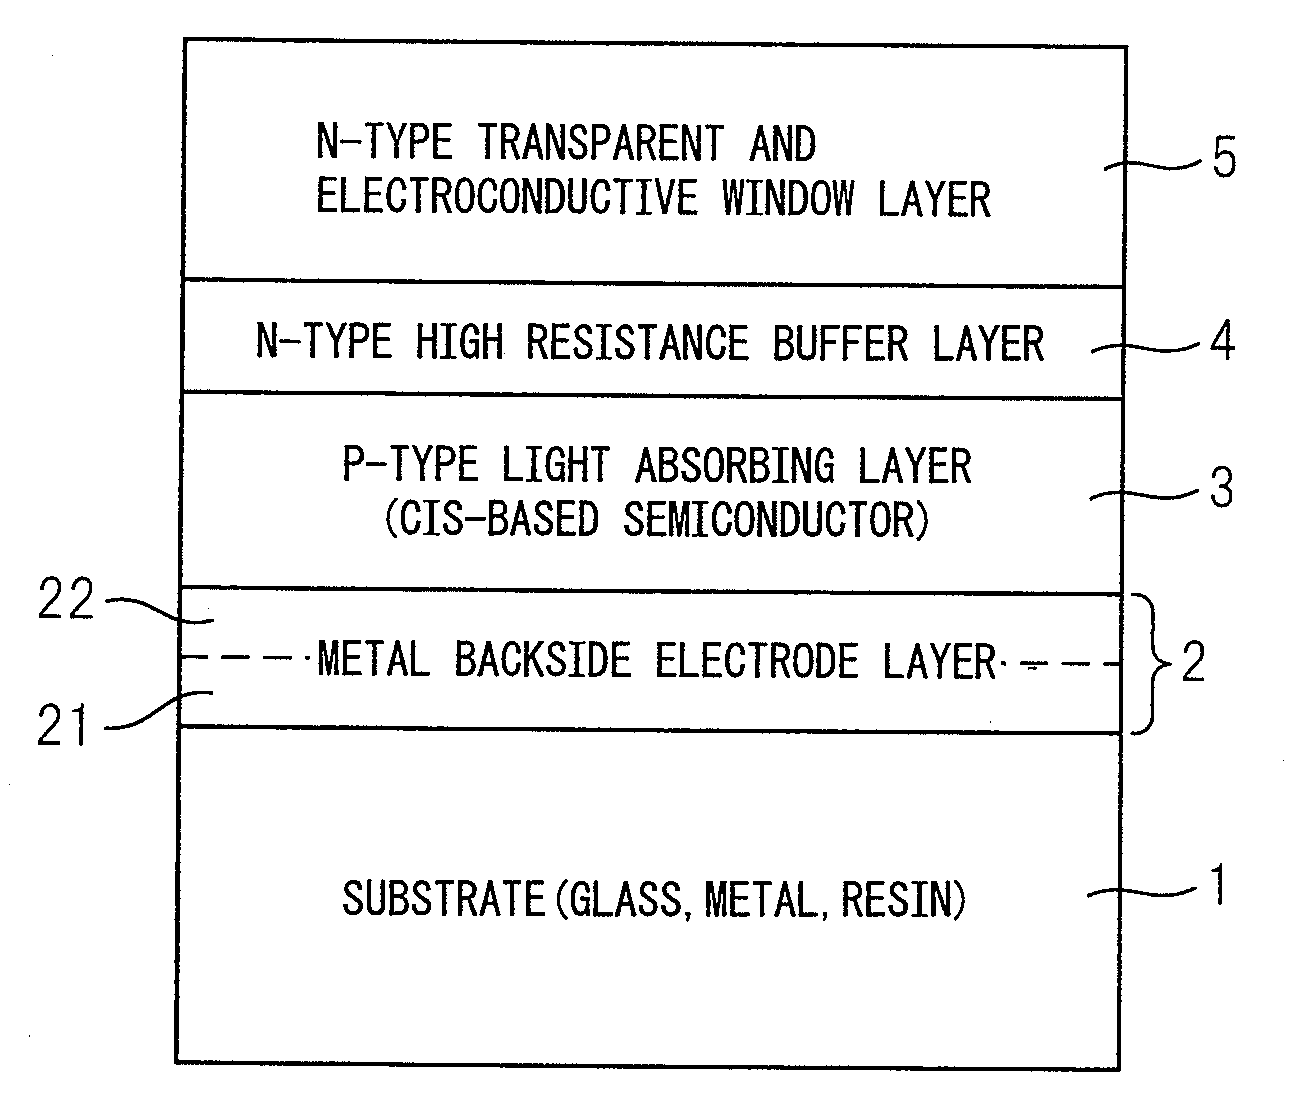 Method for manufacturing cis-based thin film solar cell